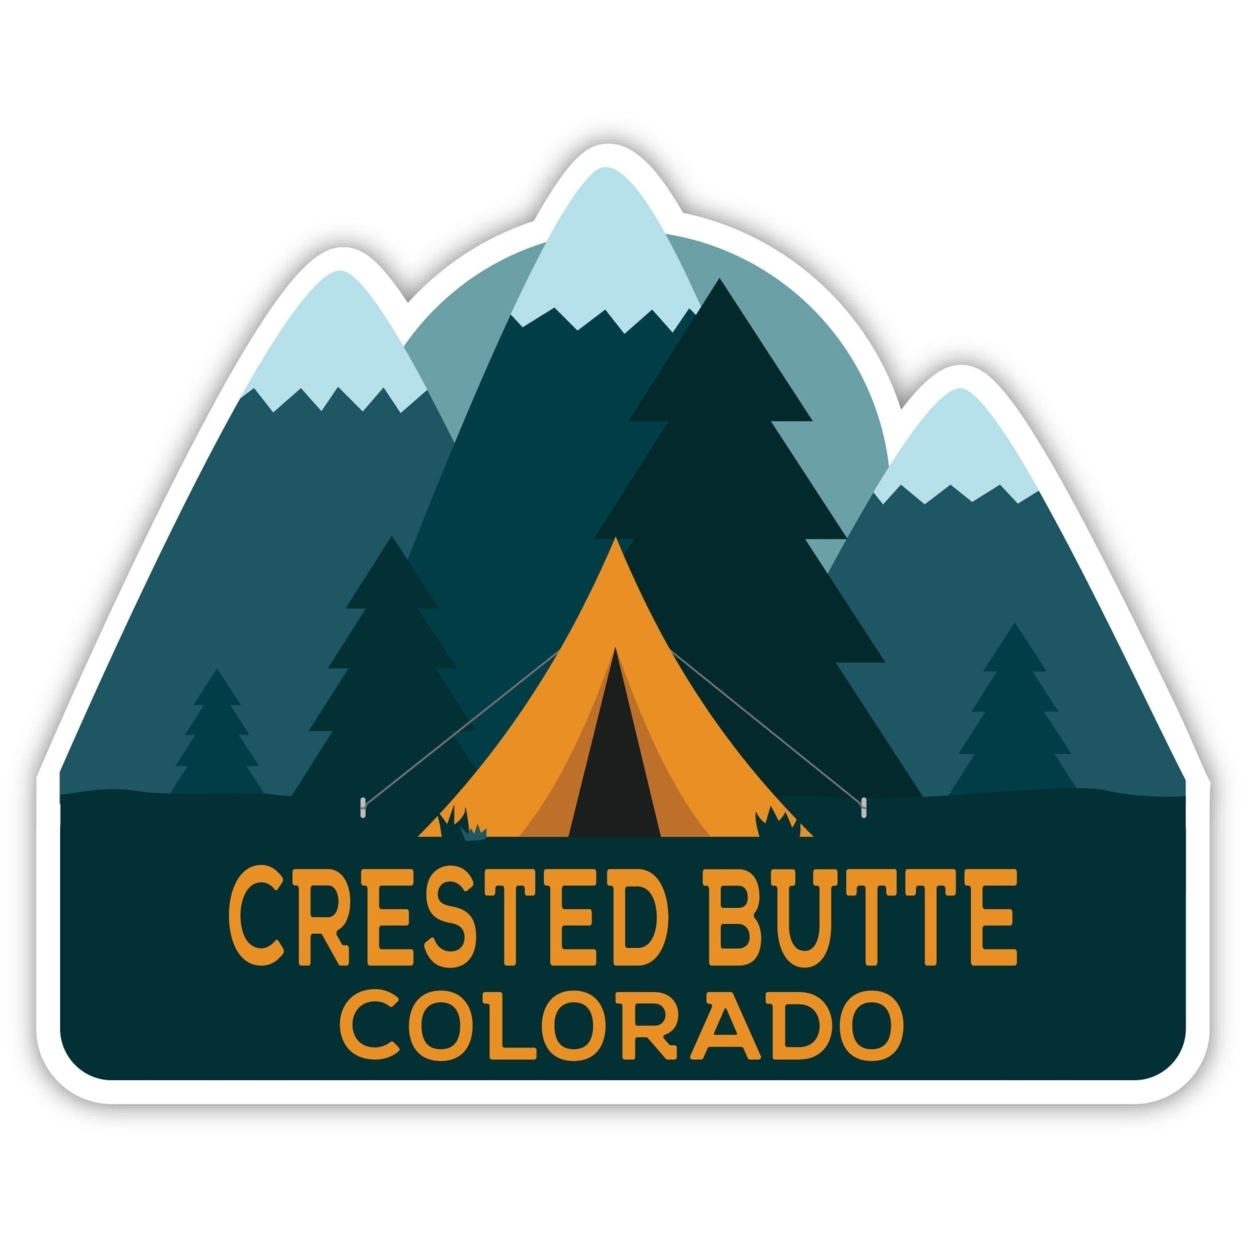 Crested Butte Colorado Souvenir Decorative Stickers (Choose Theme And Size) - 4-Pack, 10-Inch, Camp Life